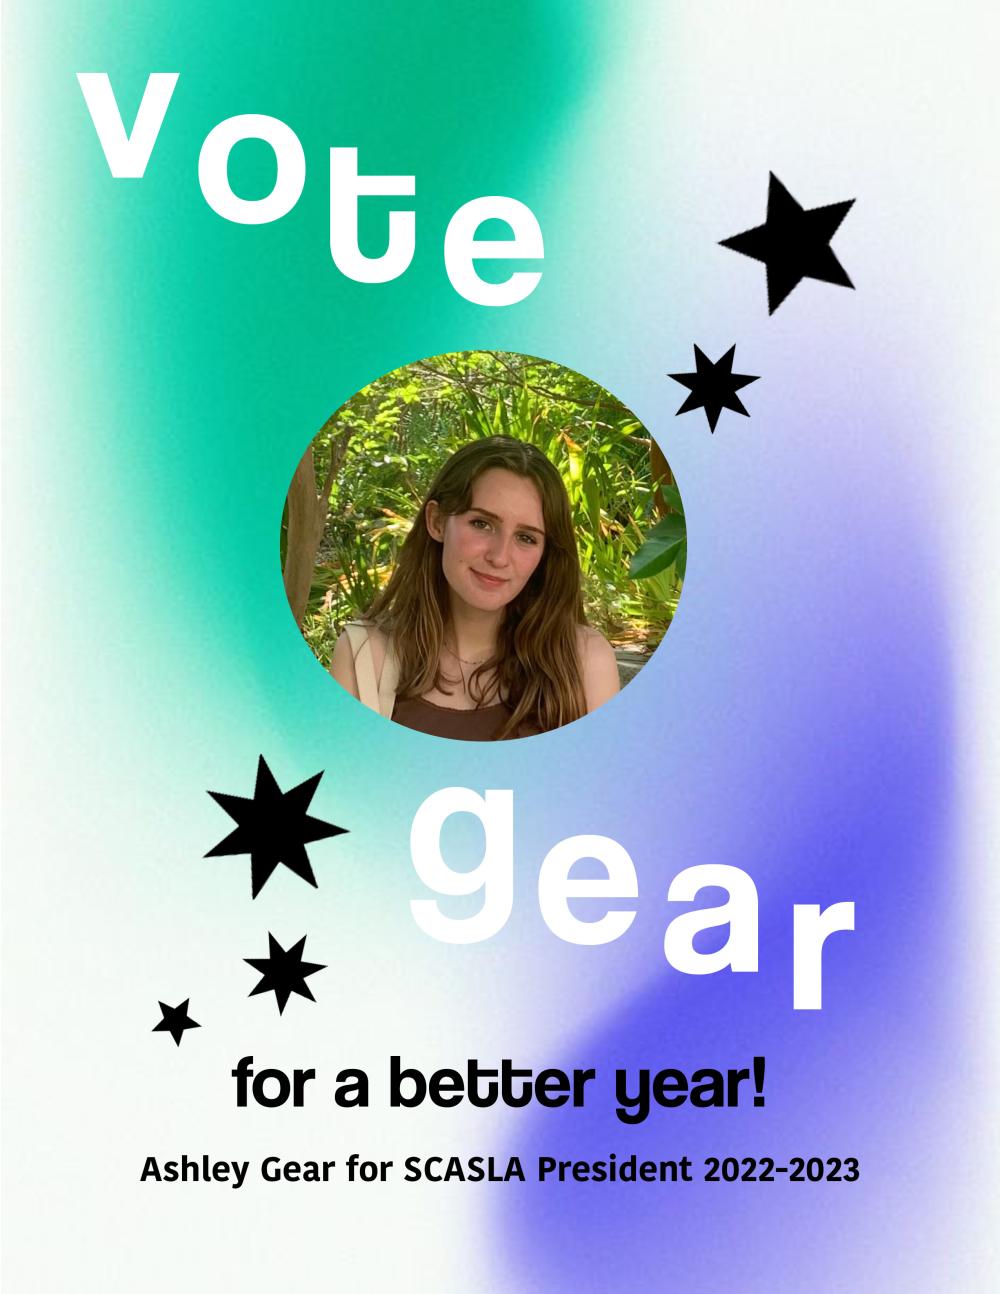 ashley gear for SCASLA 2022-23 president campaign poster page 1